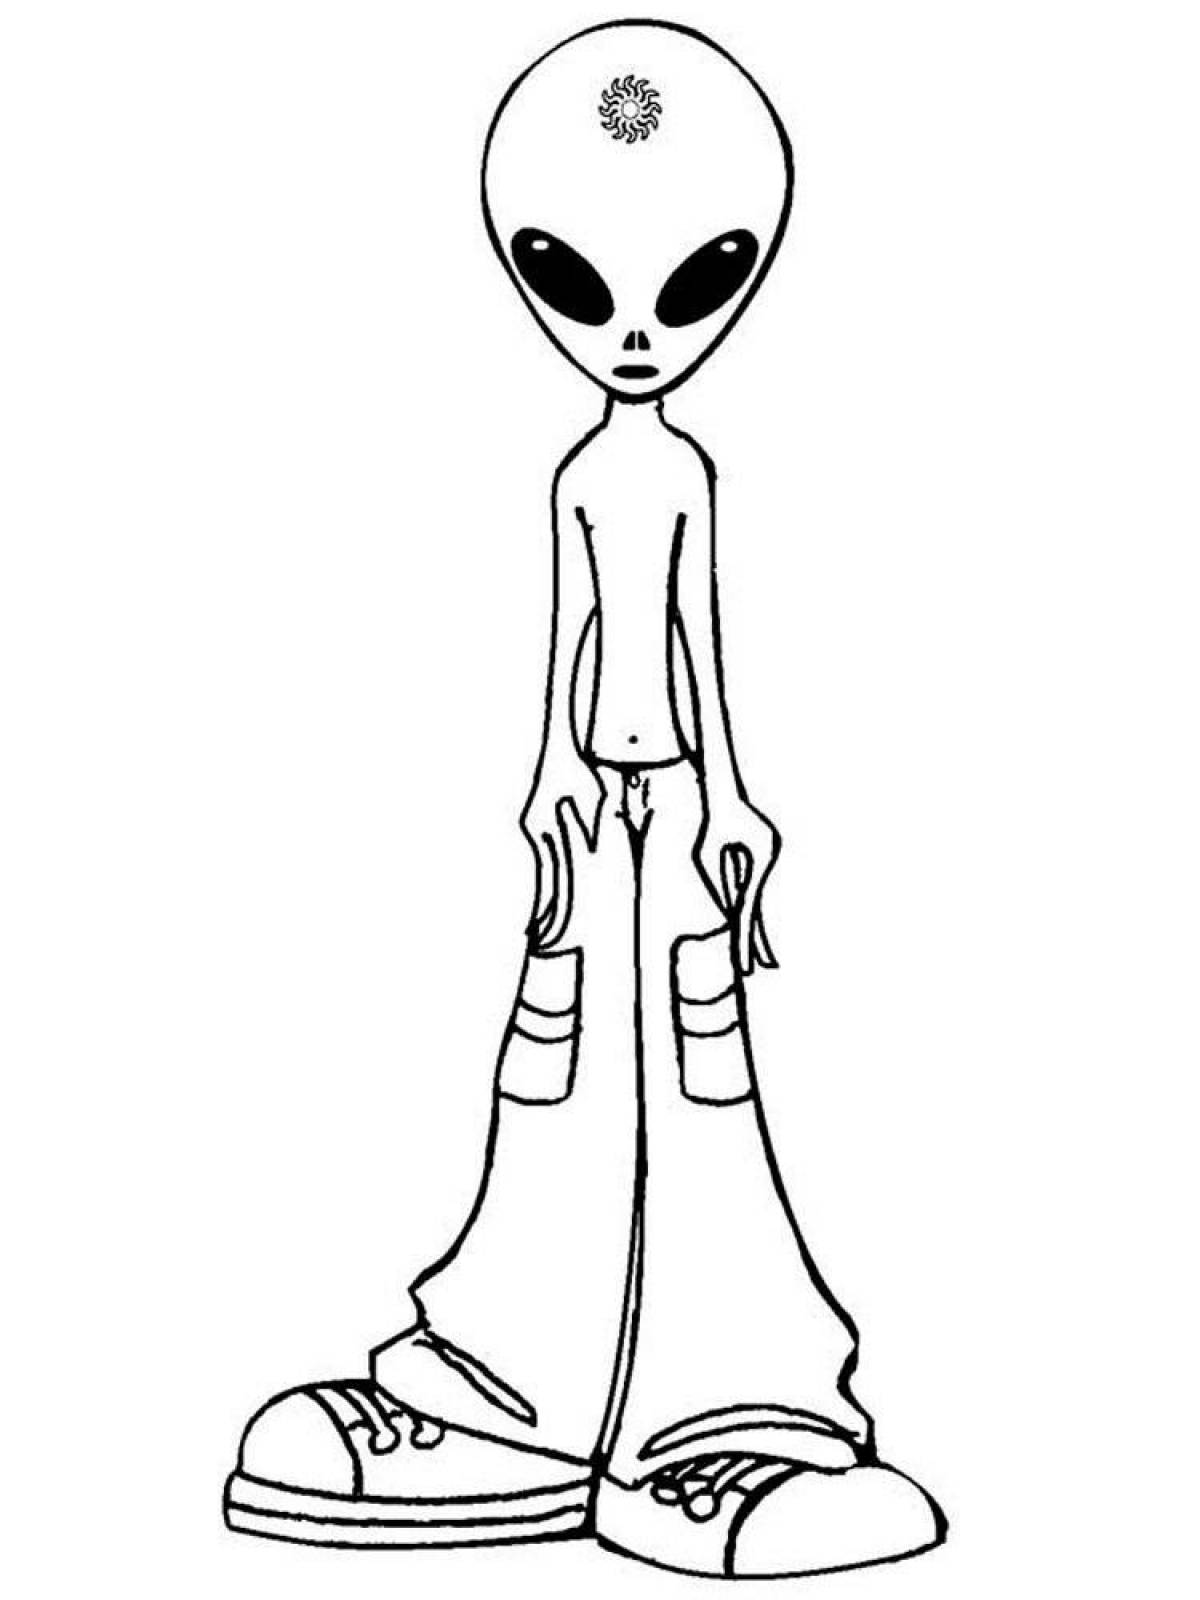 Coloring page extraterrestrial alien